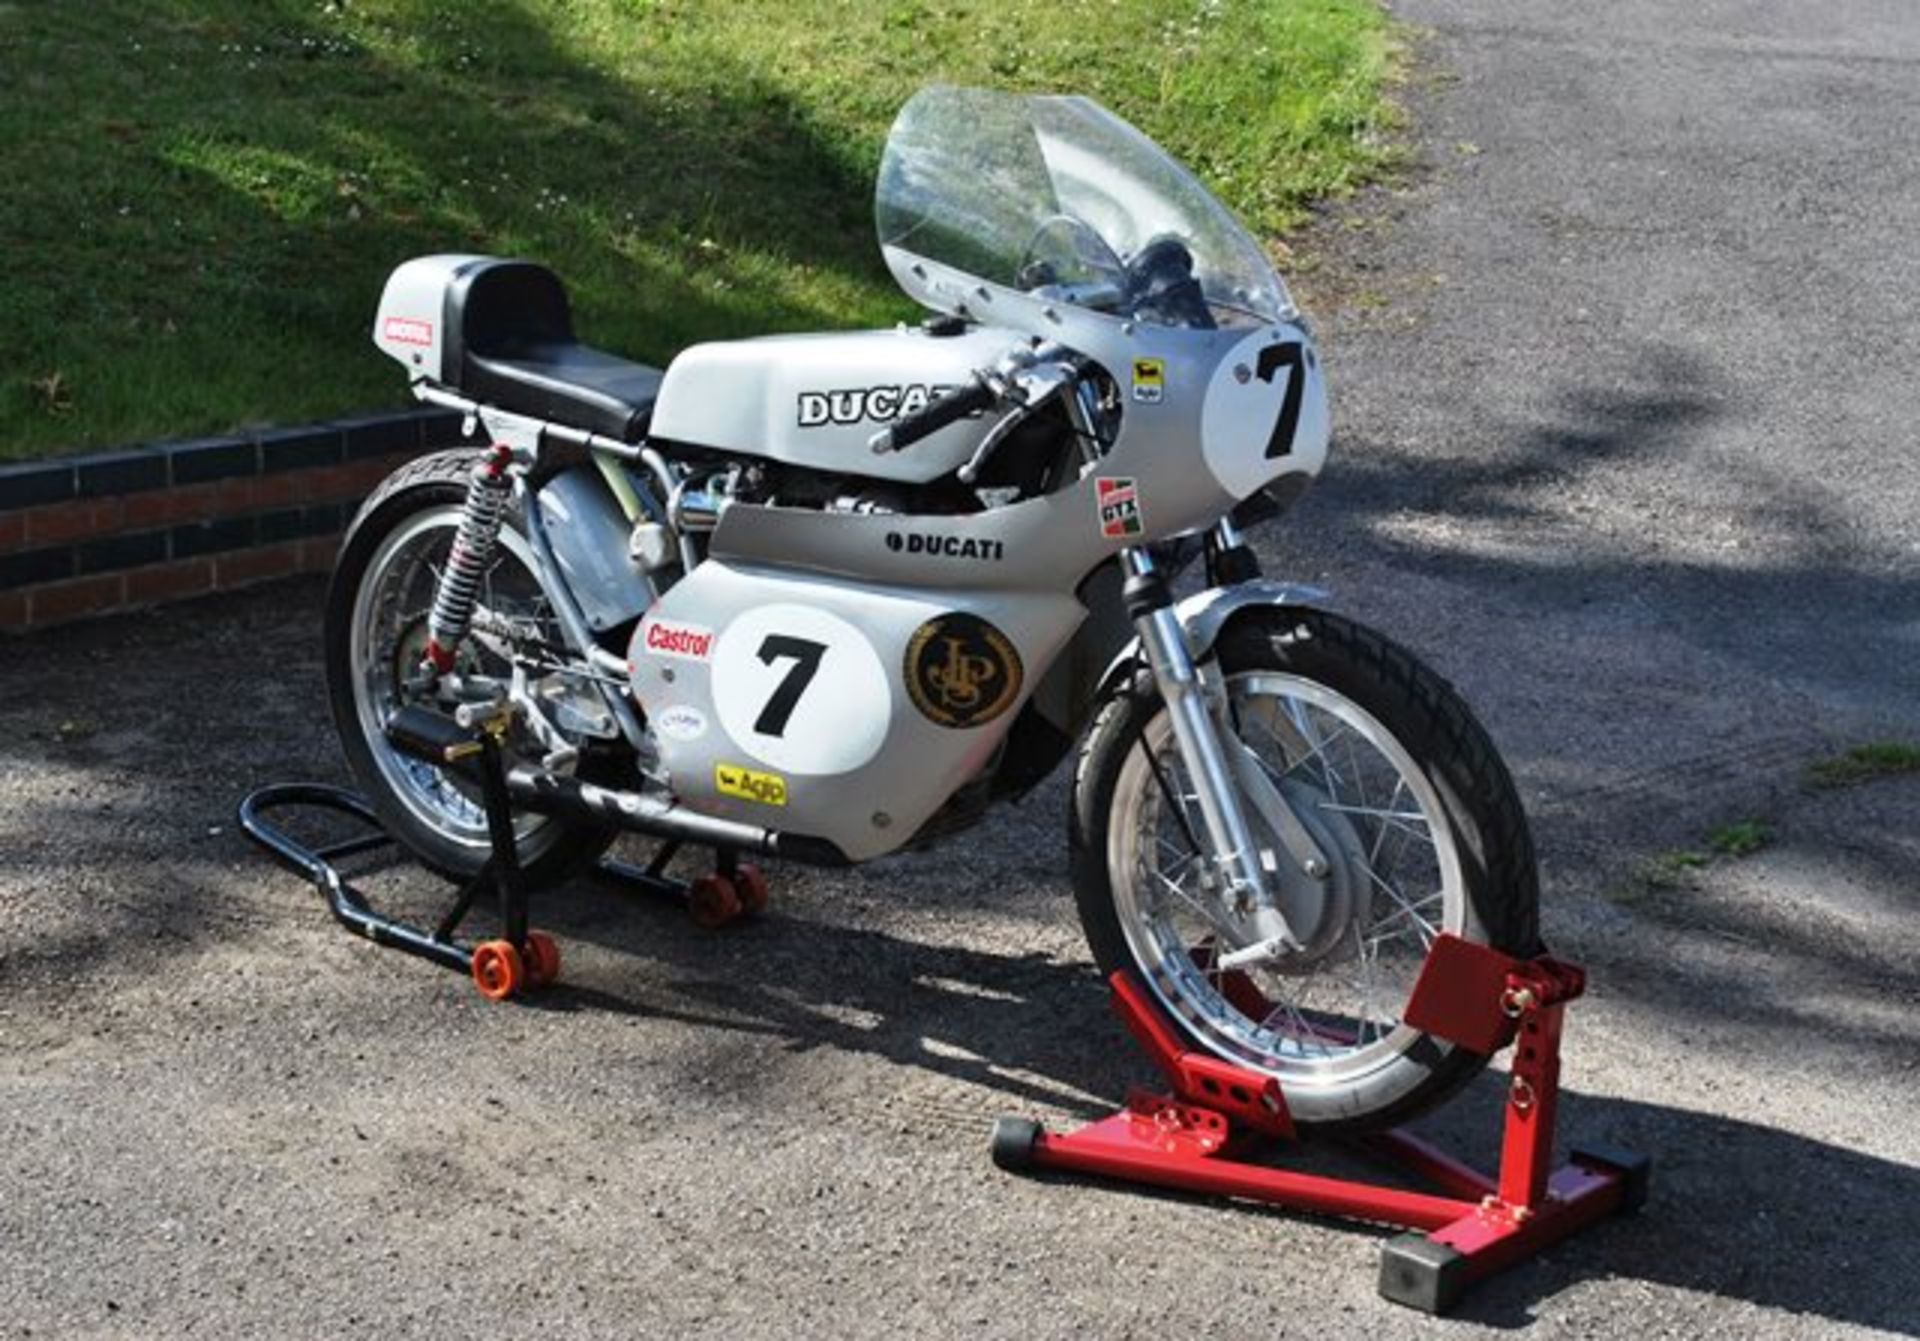 Estimate : £5,000 - £6,000 This Ducati 350 Wide Case is fitted with a Dolphin fairing, alloy rims